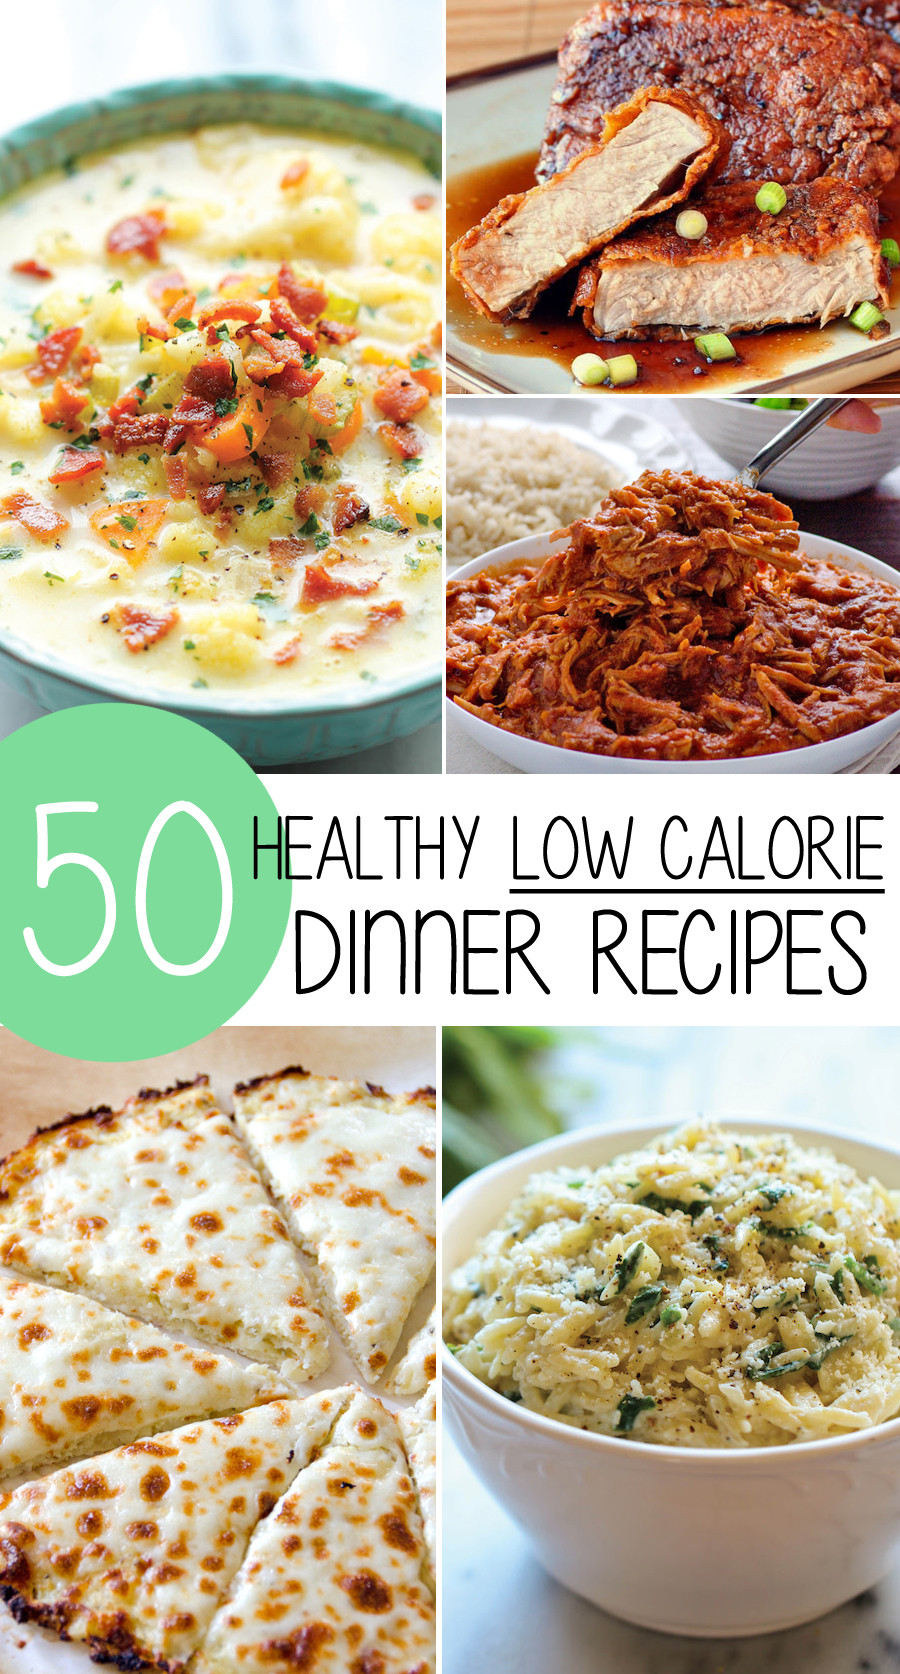 Low Cal Low Fat Recipes
 50 Healthy Low Calorie Weight Loss Dinner Recipes